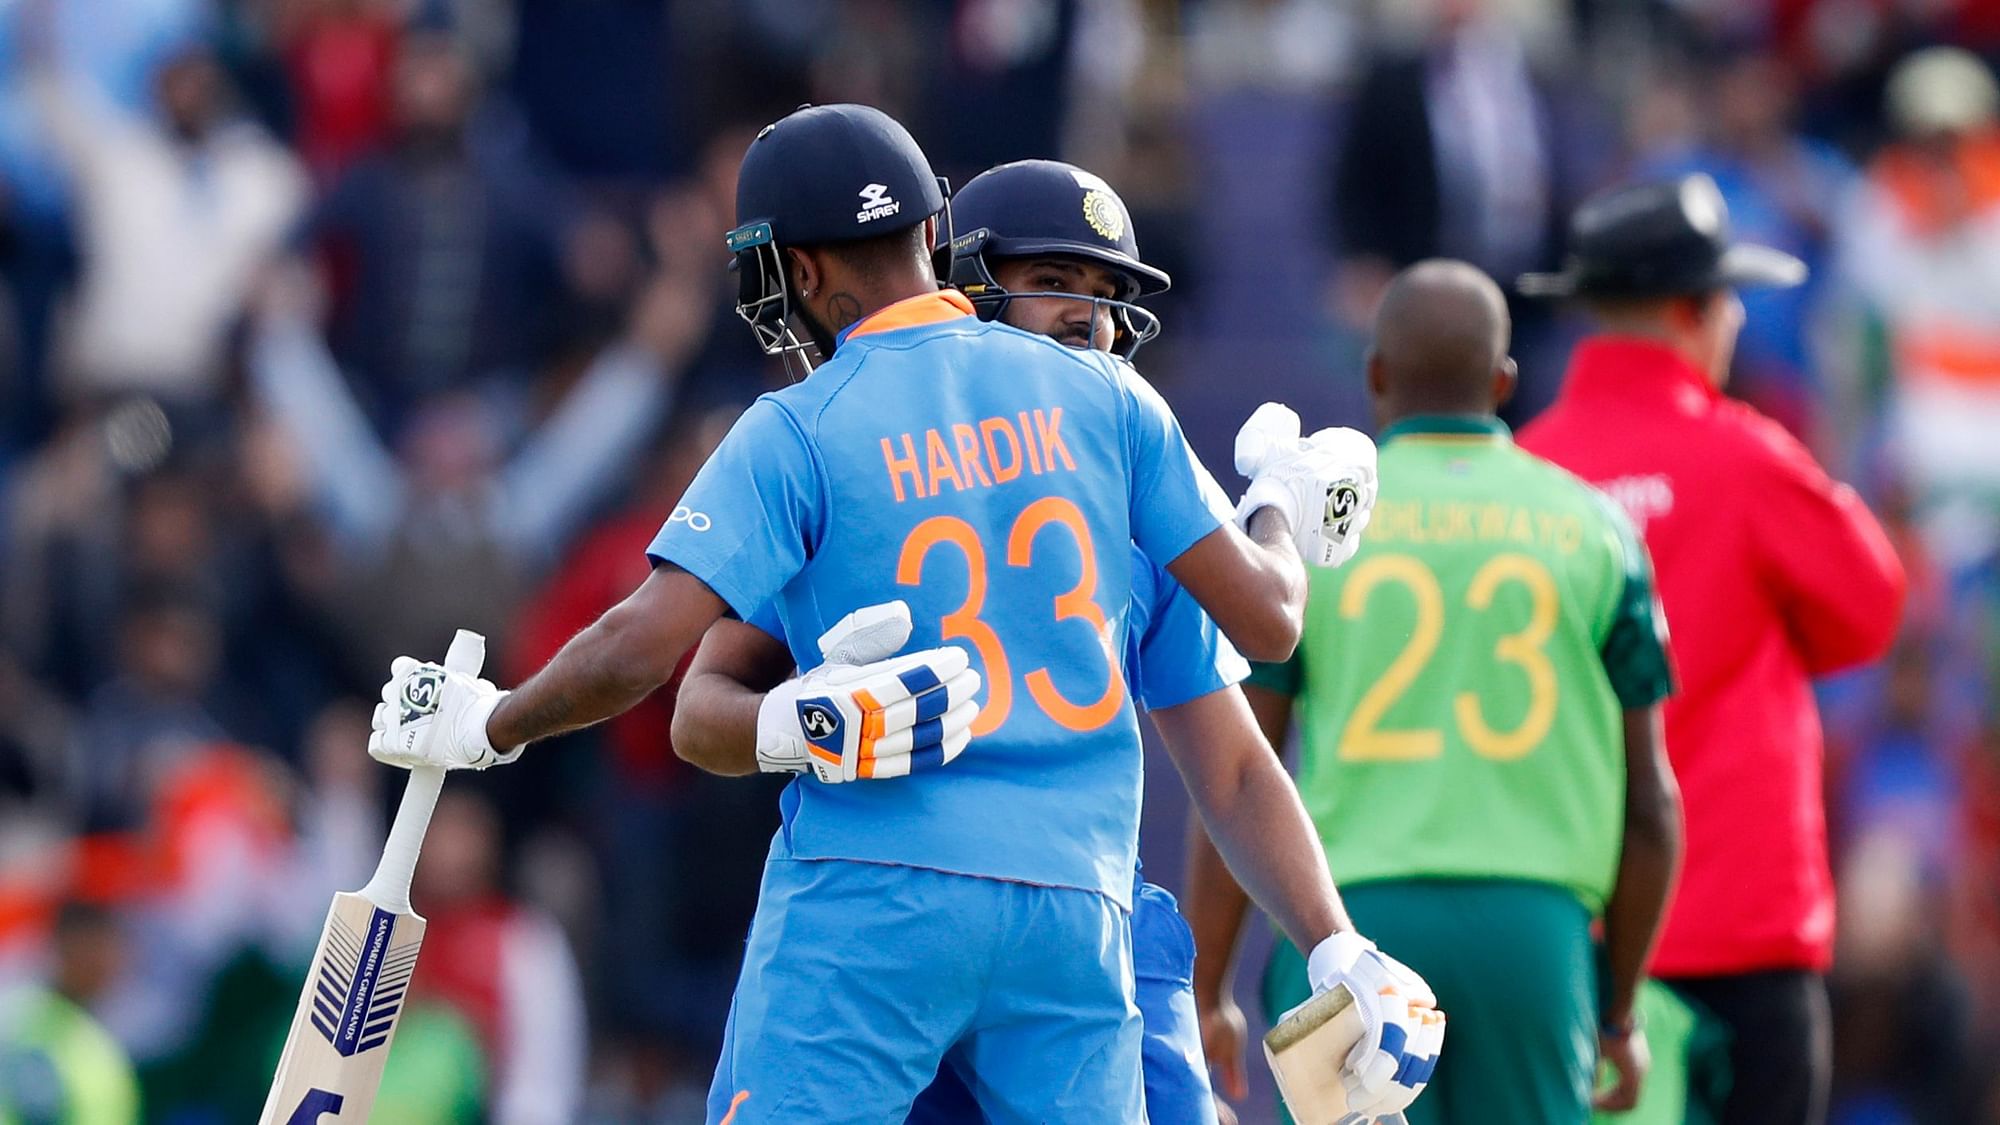 India beat South Africa by 6 wickets in their 2019 ICC World Cup opener.